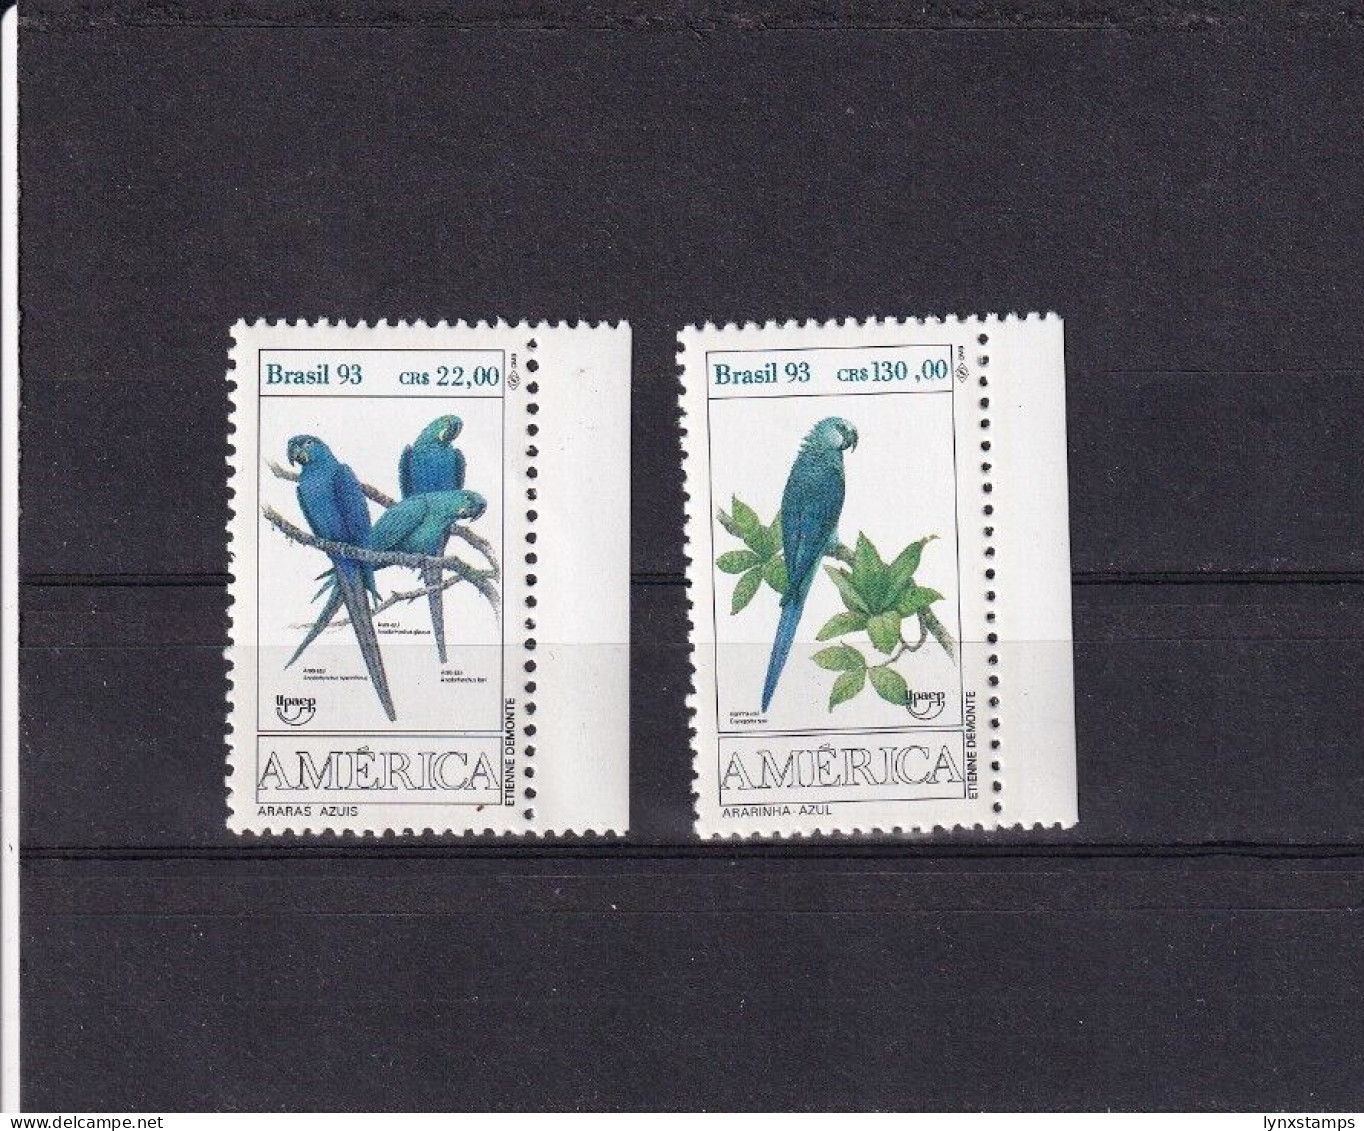 SA06 Brazil 1993 America - Endangered Birds - Macaws Mint Stamps - Unused Stamps